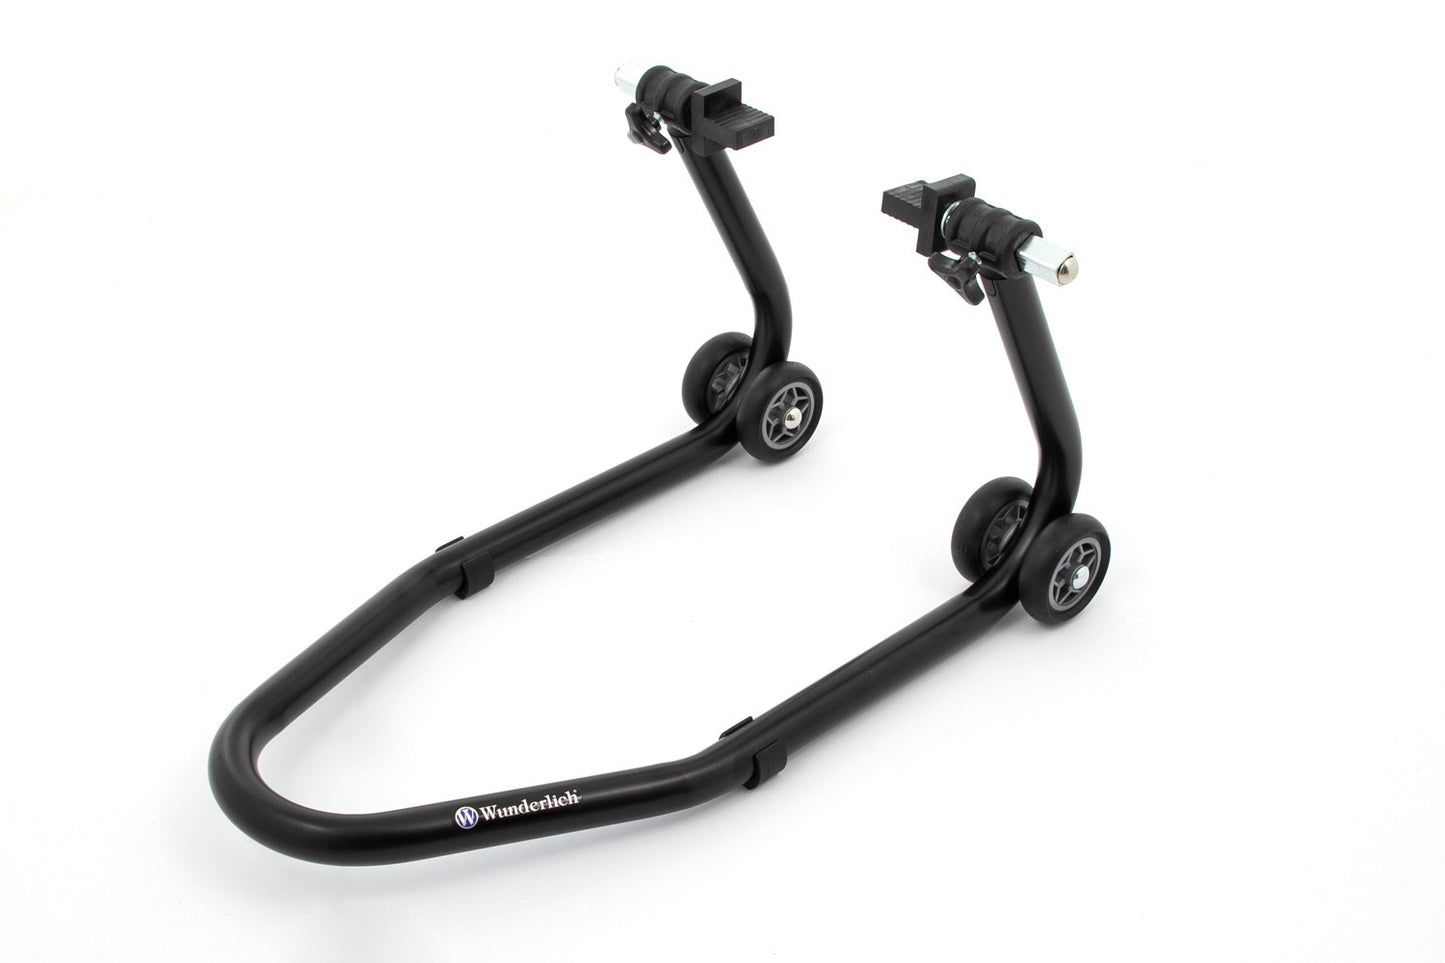 RACE Paddock Stand front lifter - black